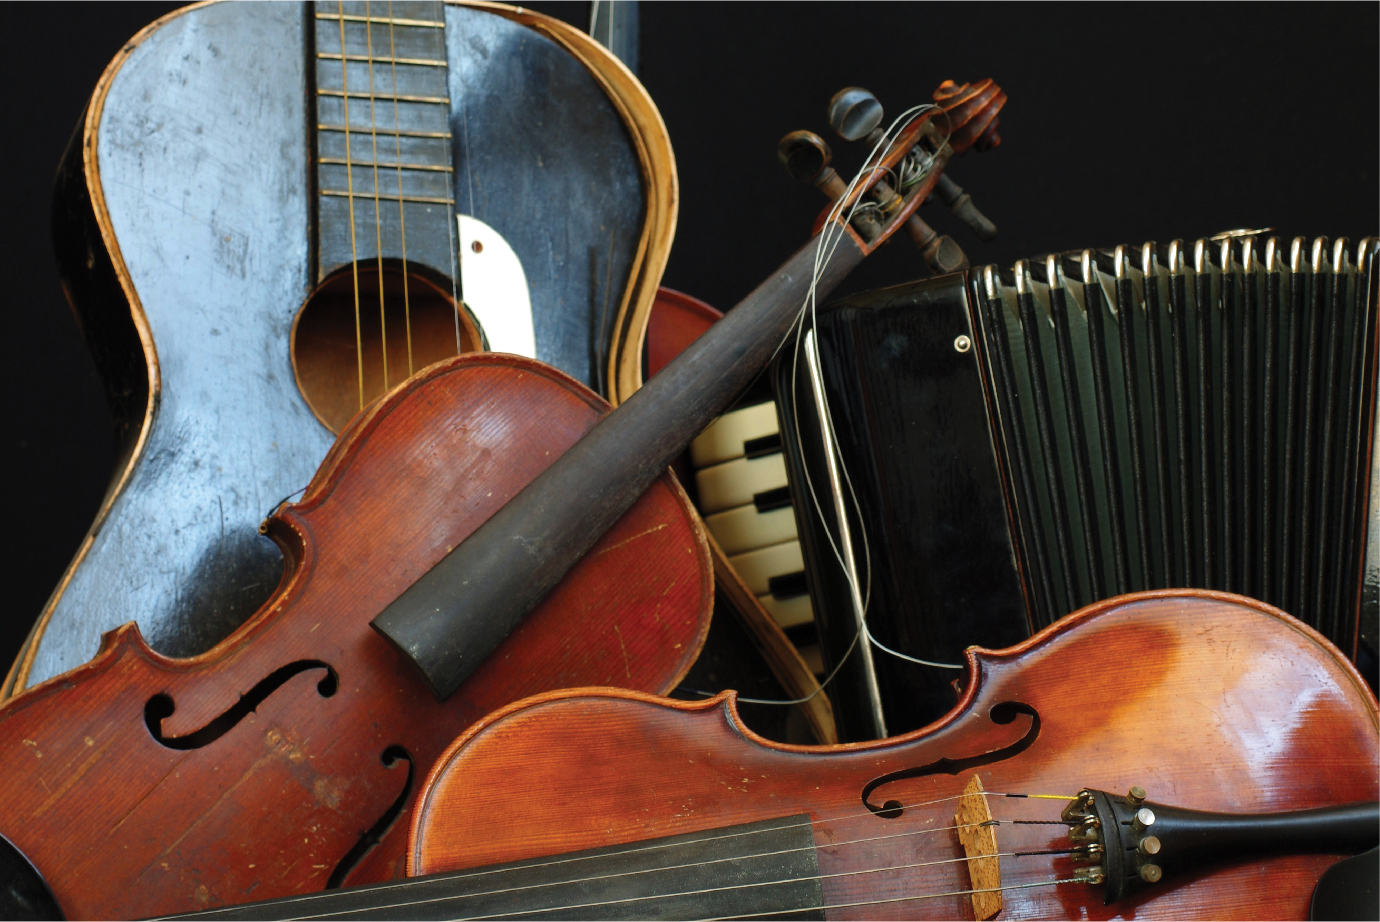 A picture of a guitar and two violins.